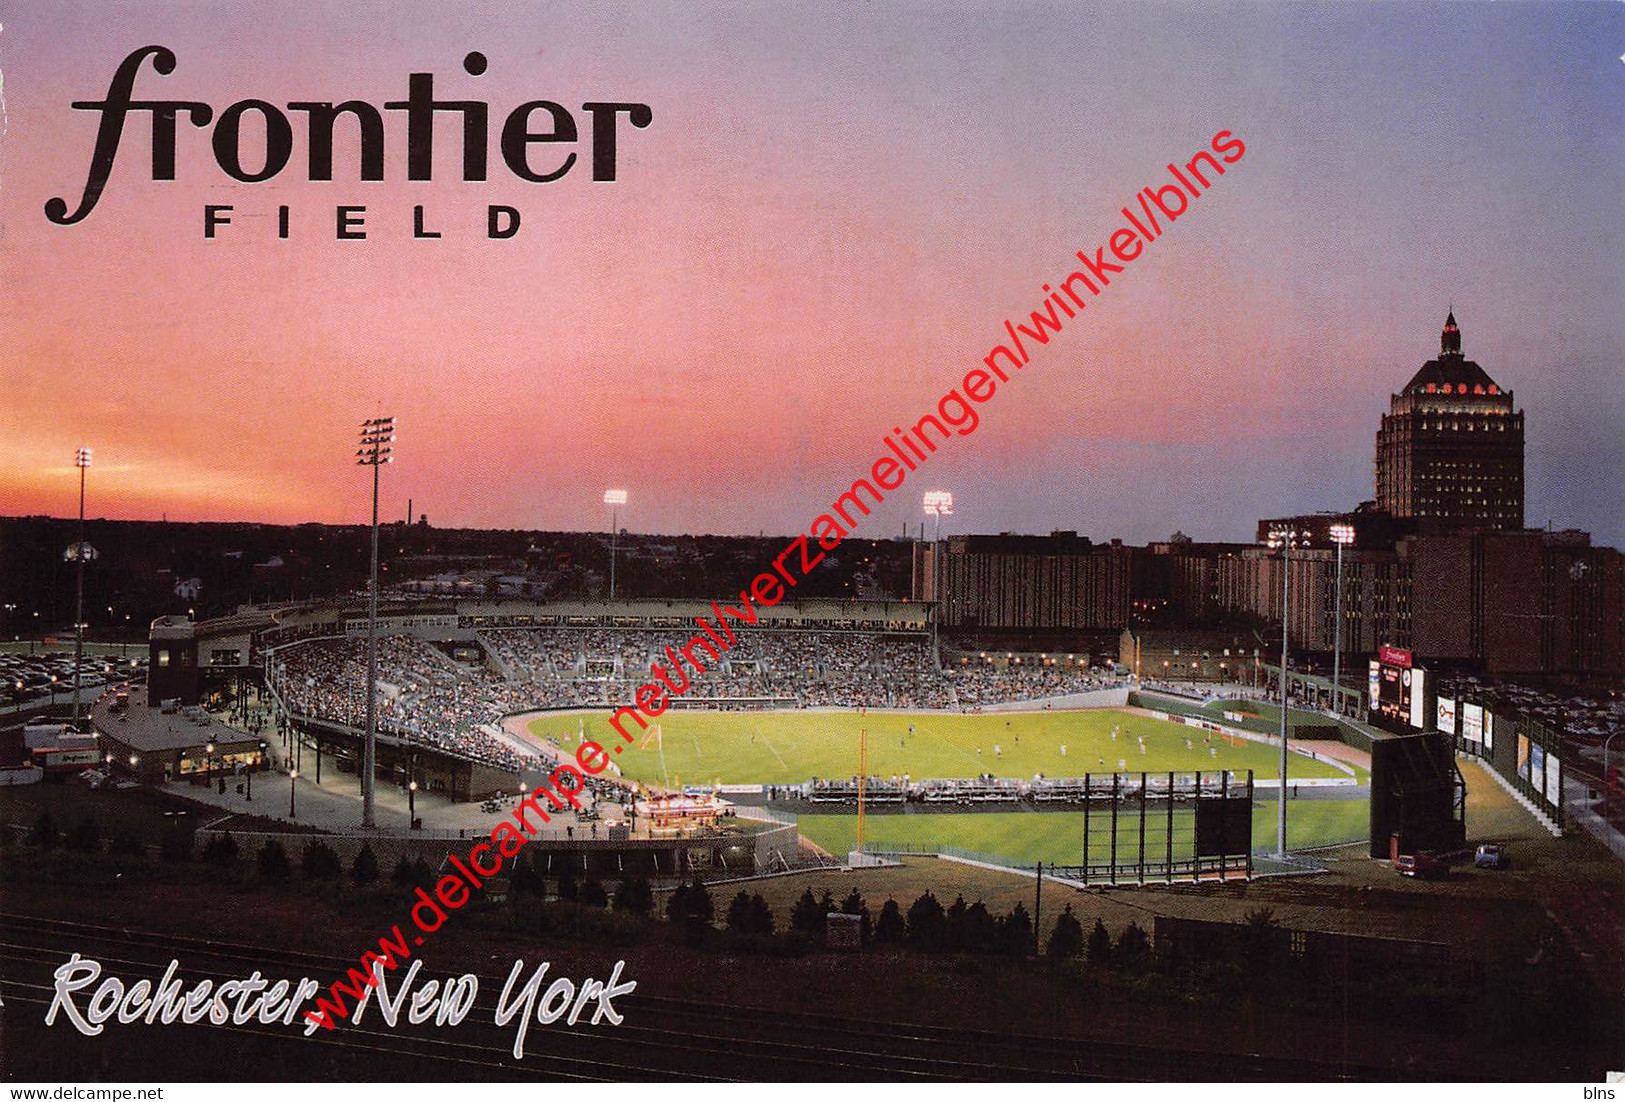 Rochester - Frontier Field - New York - Baseball - United States USA - Rochester